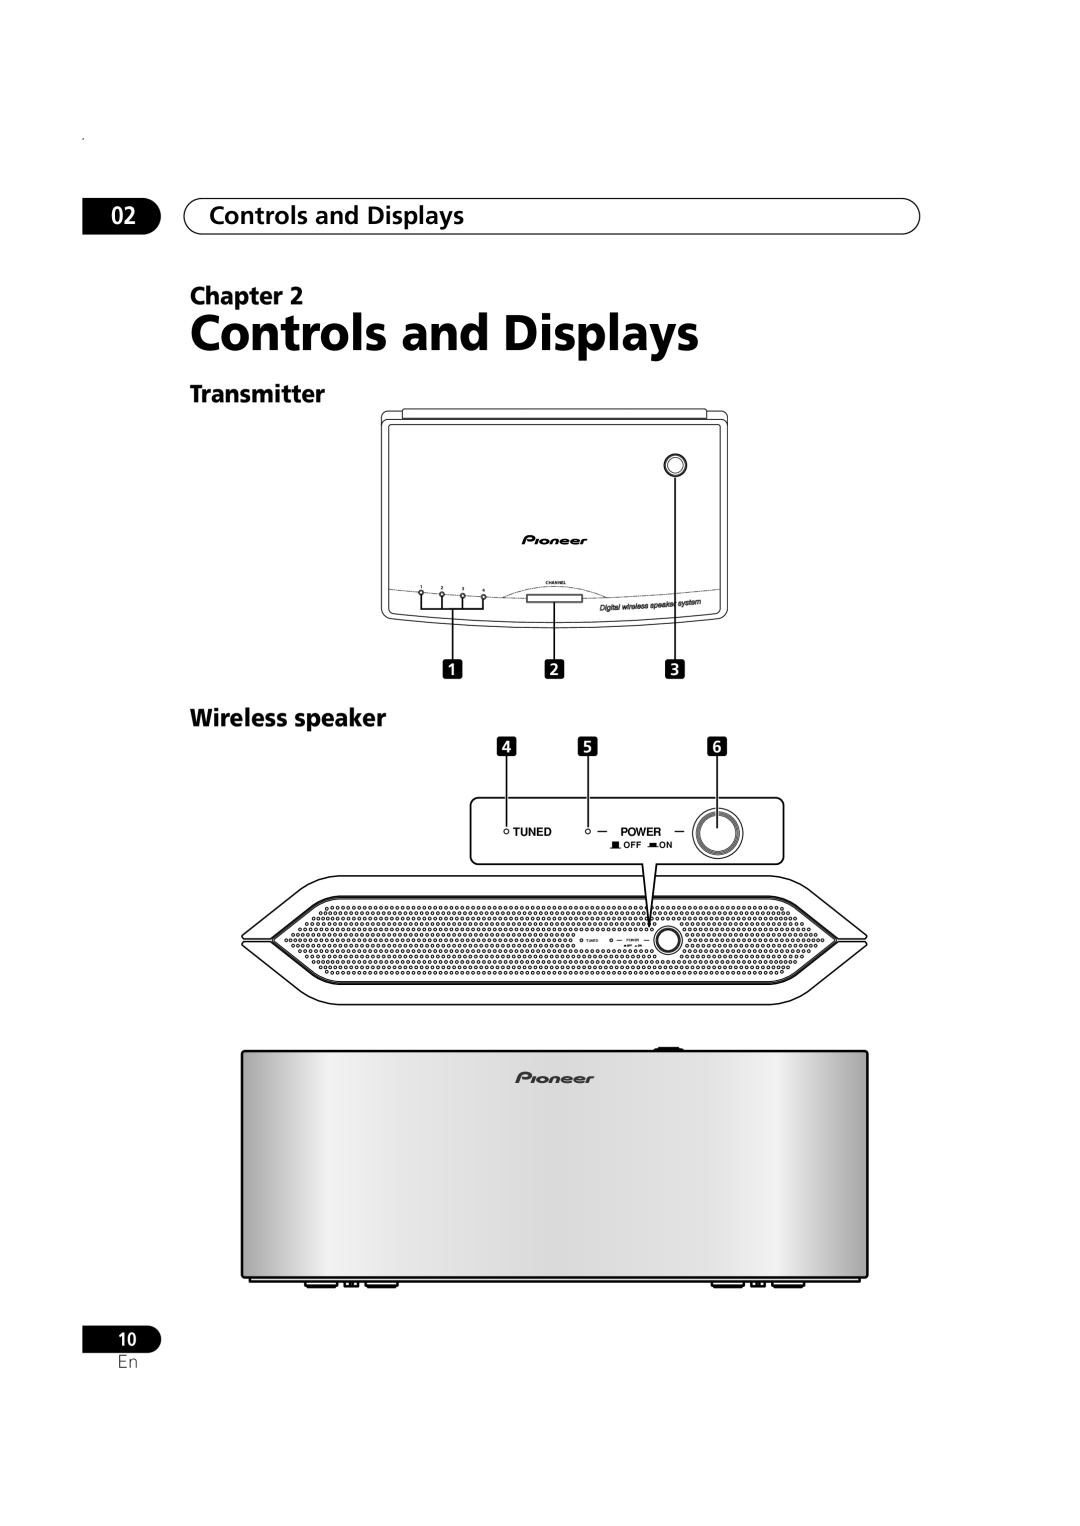 Pioneer XW-HTP550 manual 02Controls and Displays Chapter, Transmitter, Wireless speaker, Tuned, Power, Off On, Channel 